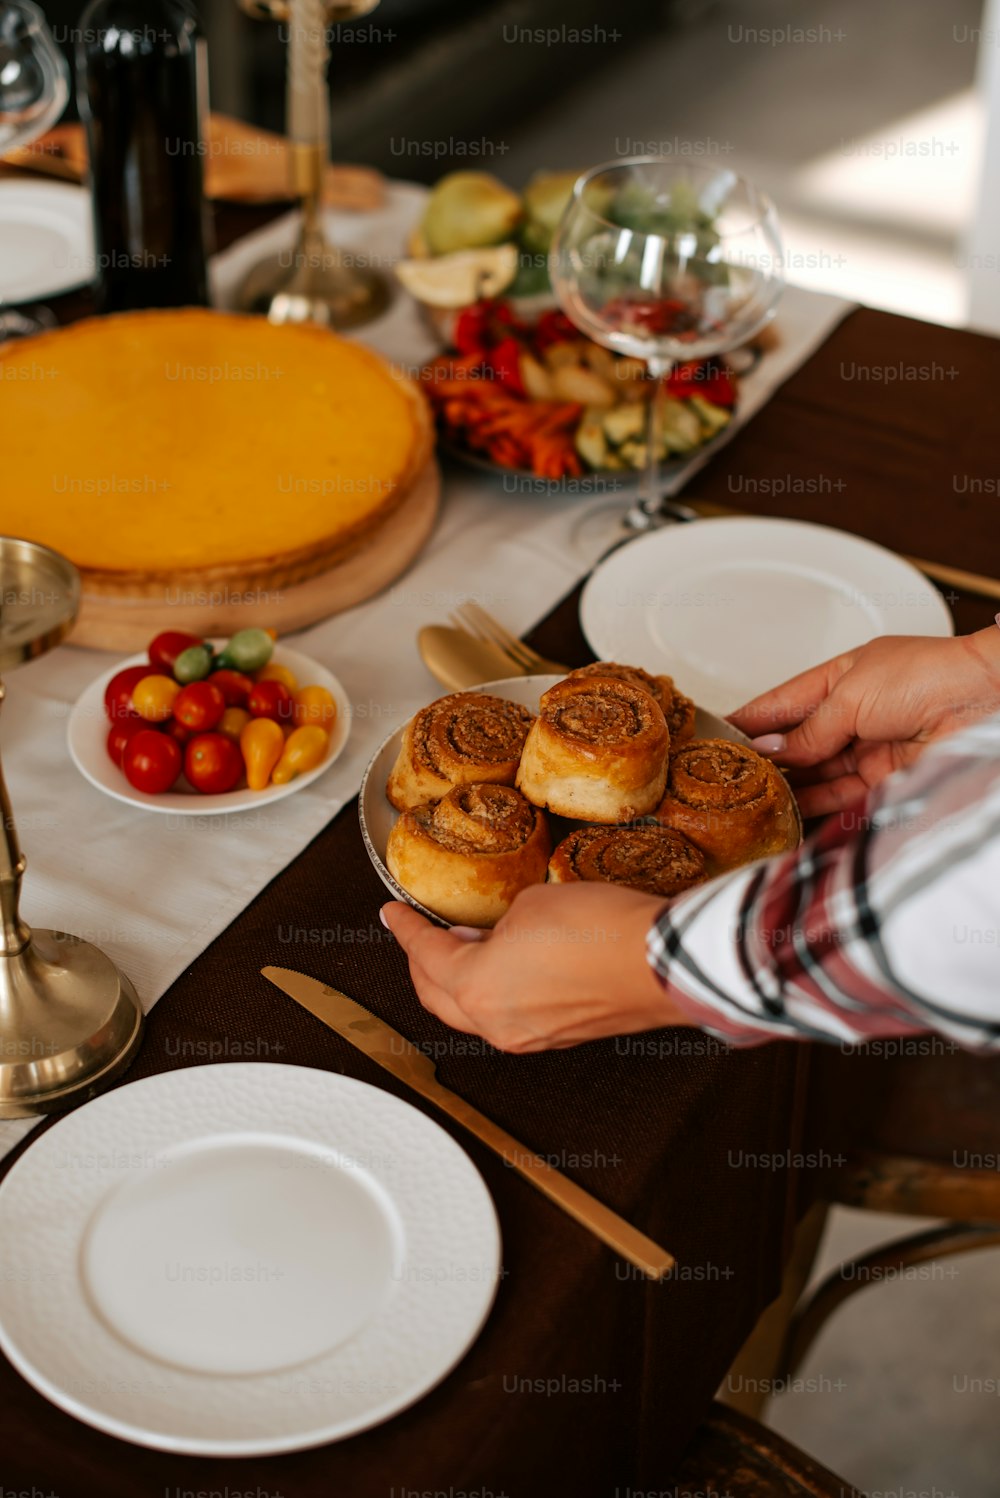 a person holding a plate of food on a table